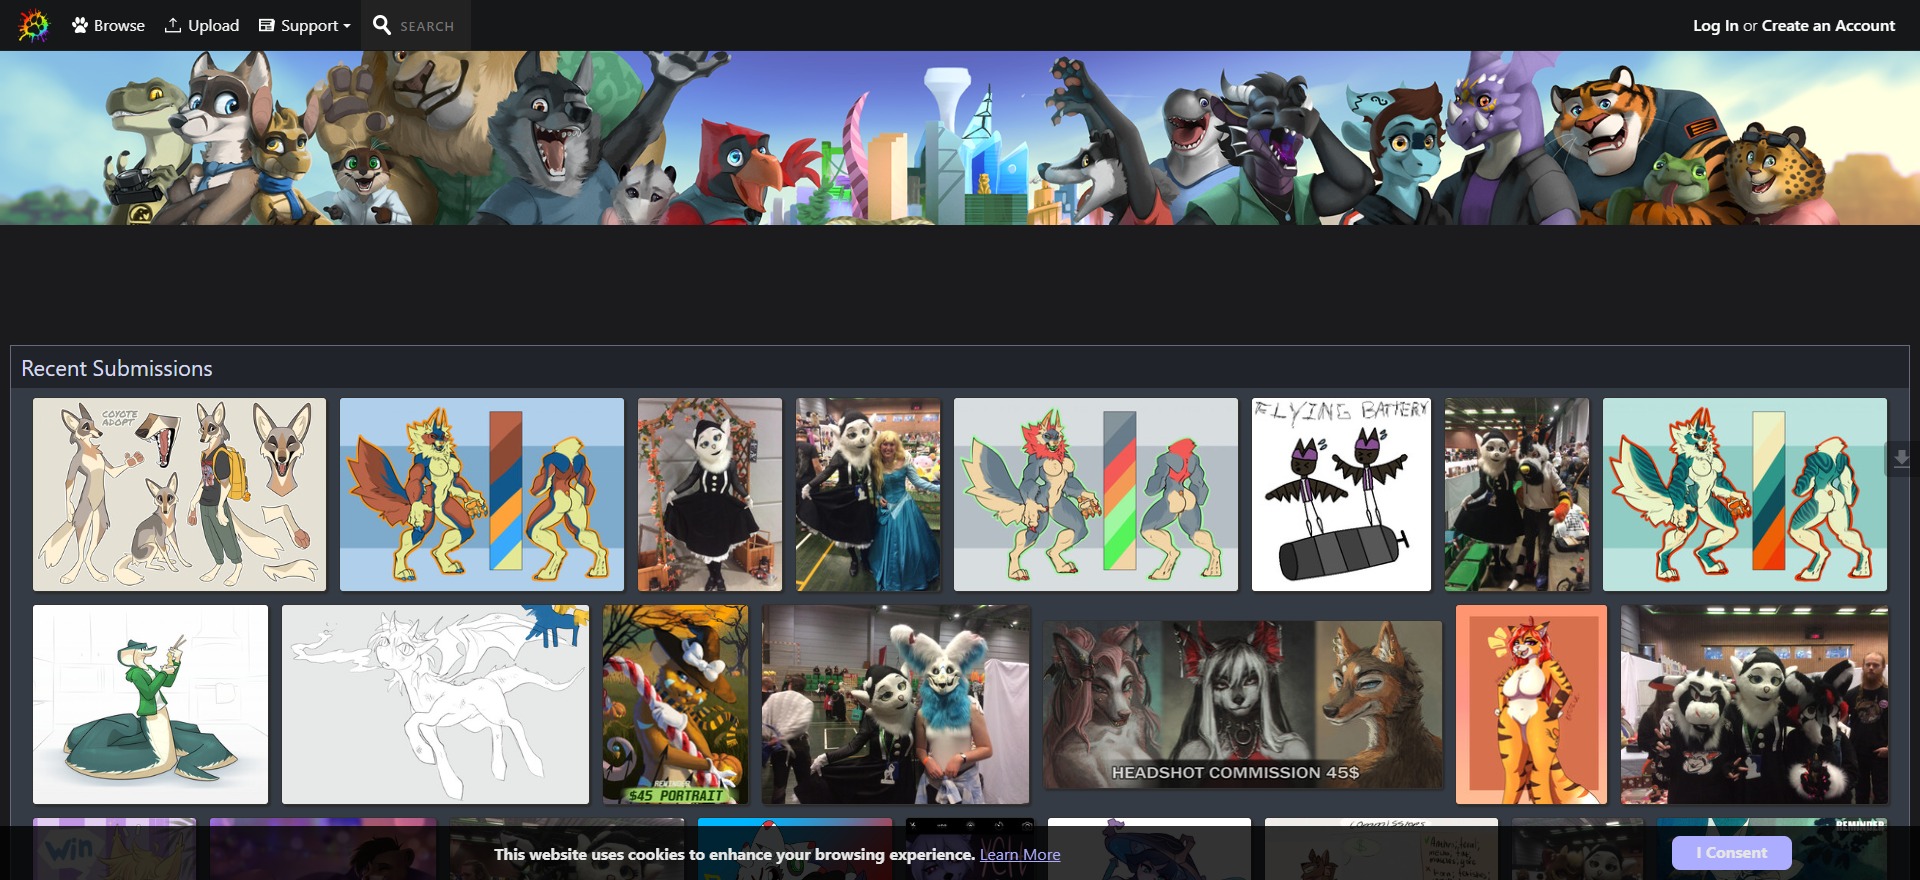 Furaffinity: Everything You Need to Know